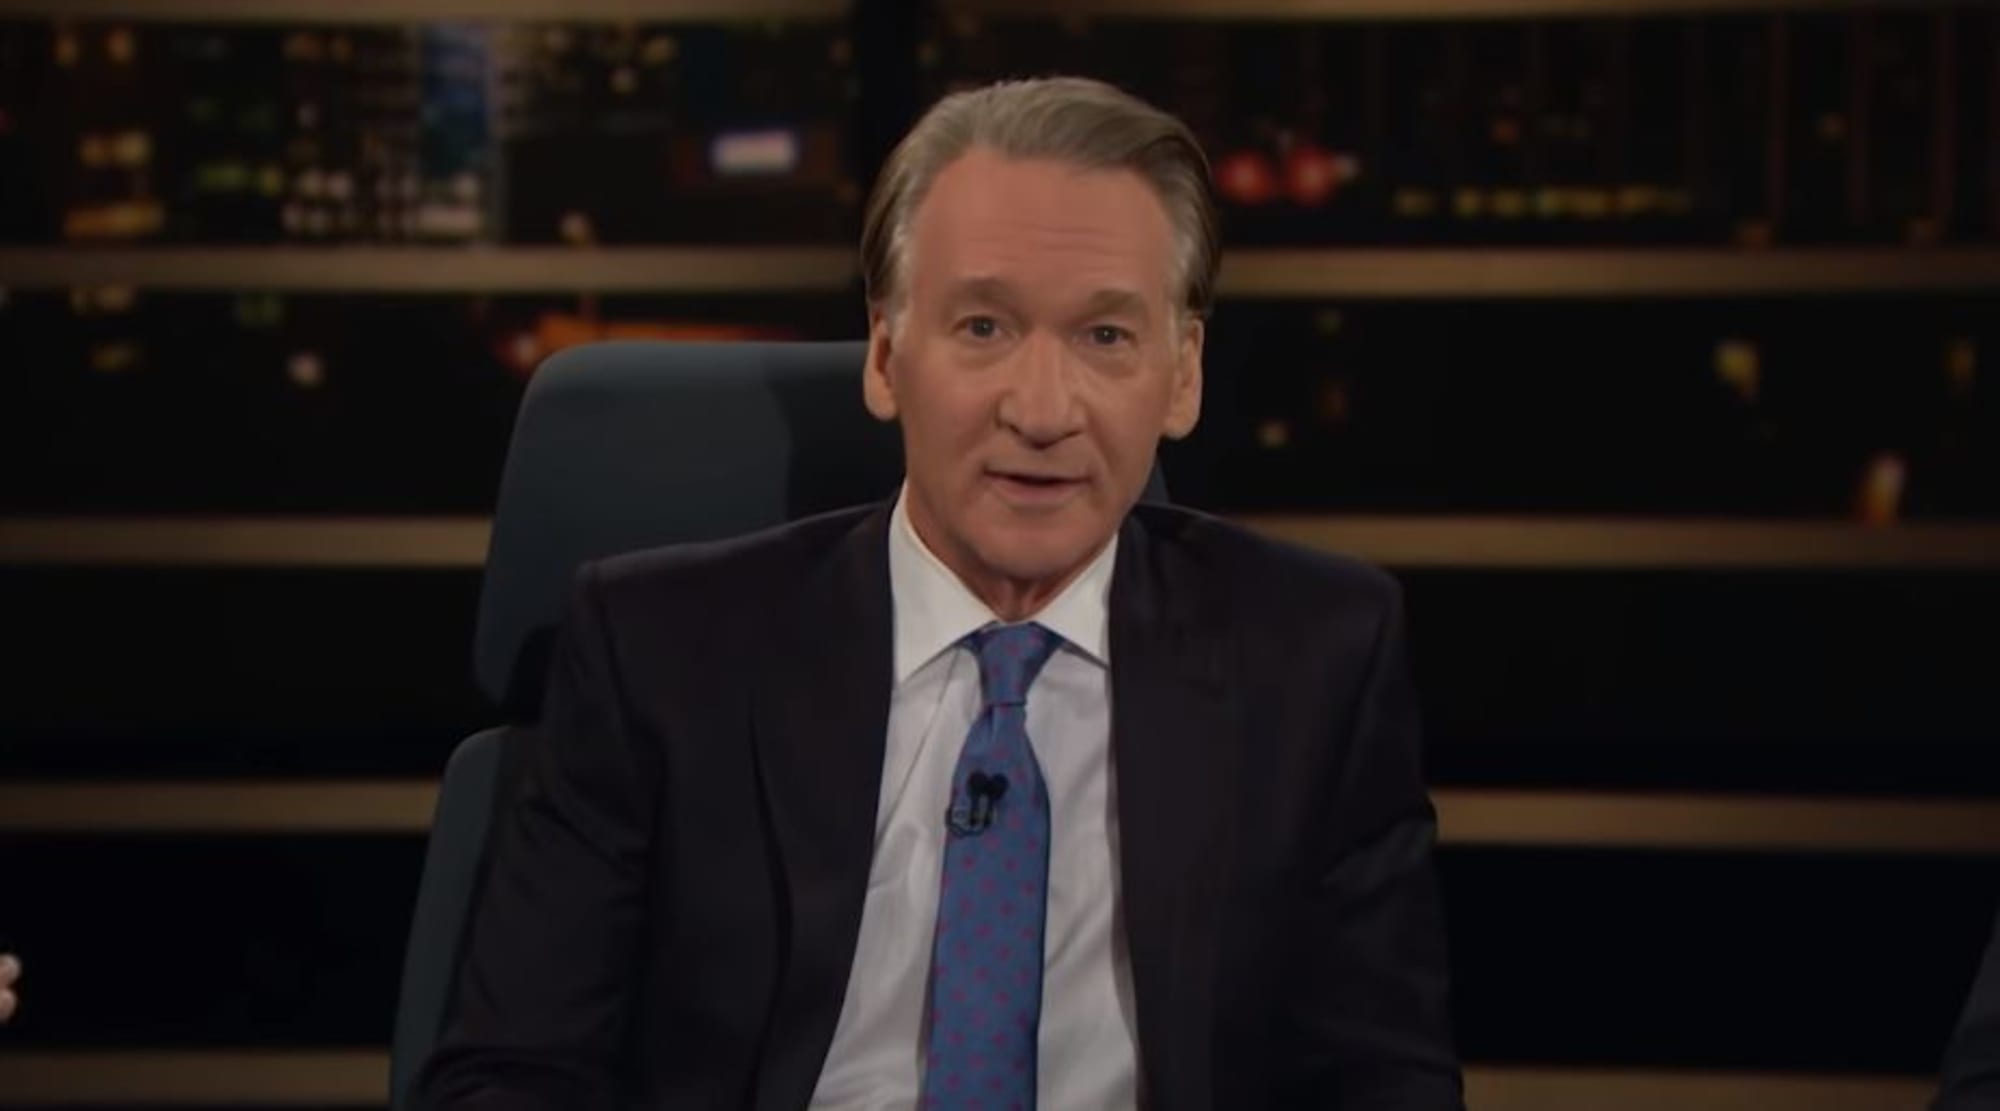 Is Real Time with Bill Maher on tonight, August 17th, 2018?